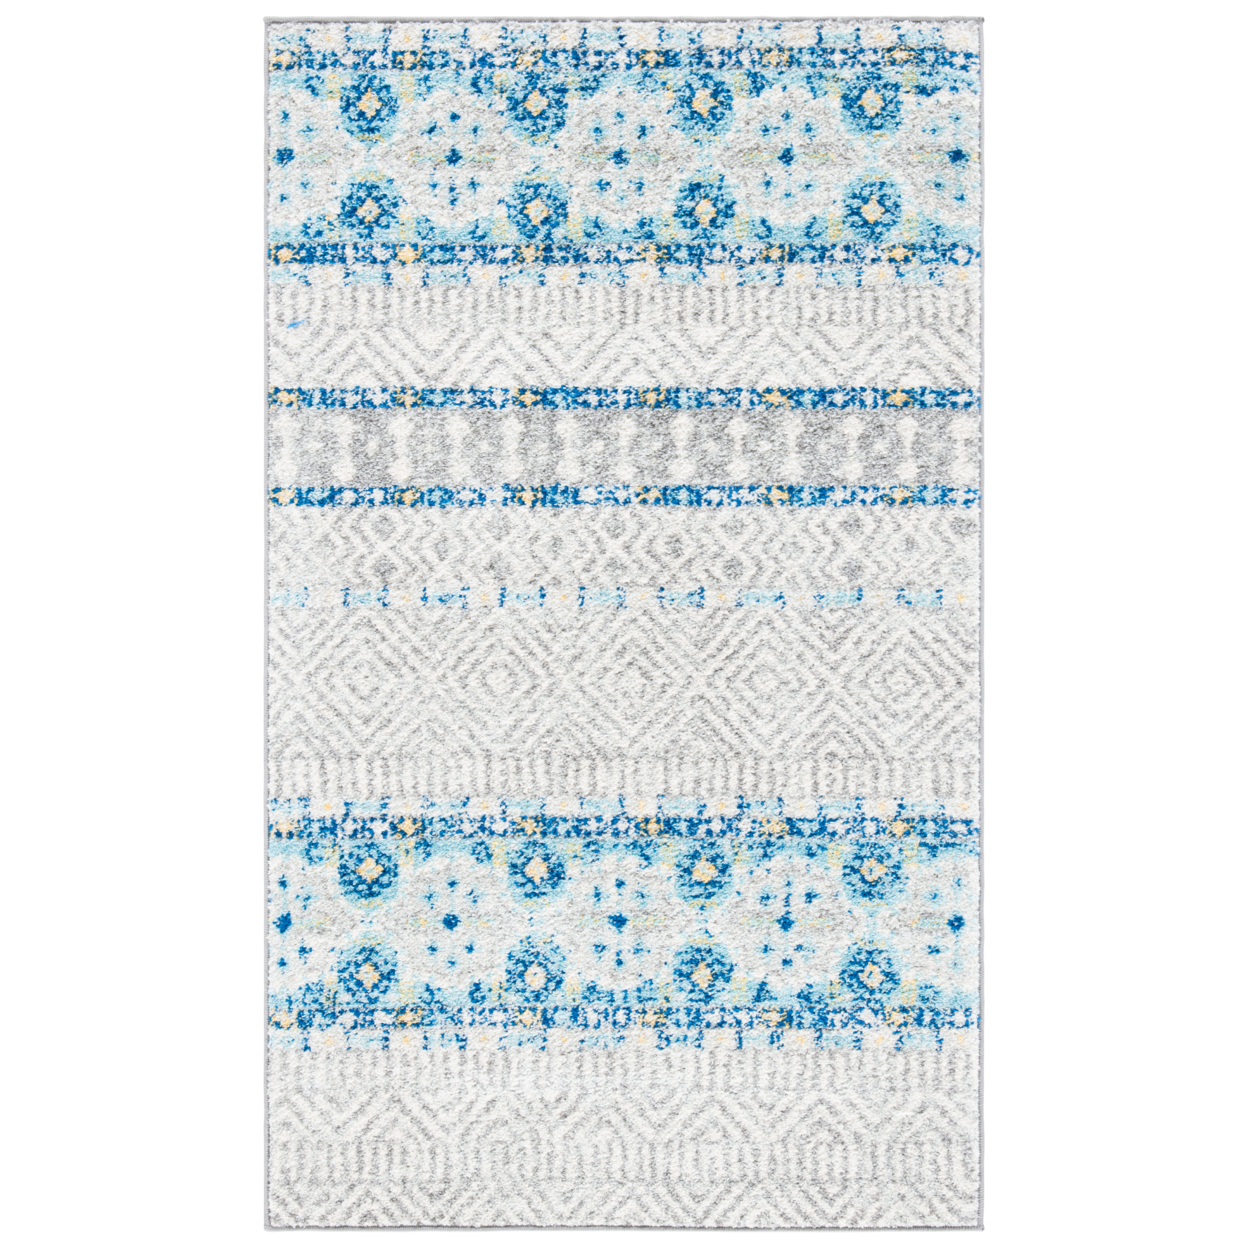 SAFAVIEH Madison Collection MAD797G Grey / Turquoise Rug - 6-7 X 6-7 Square